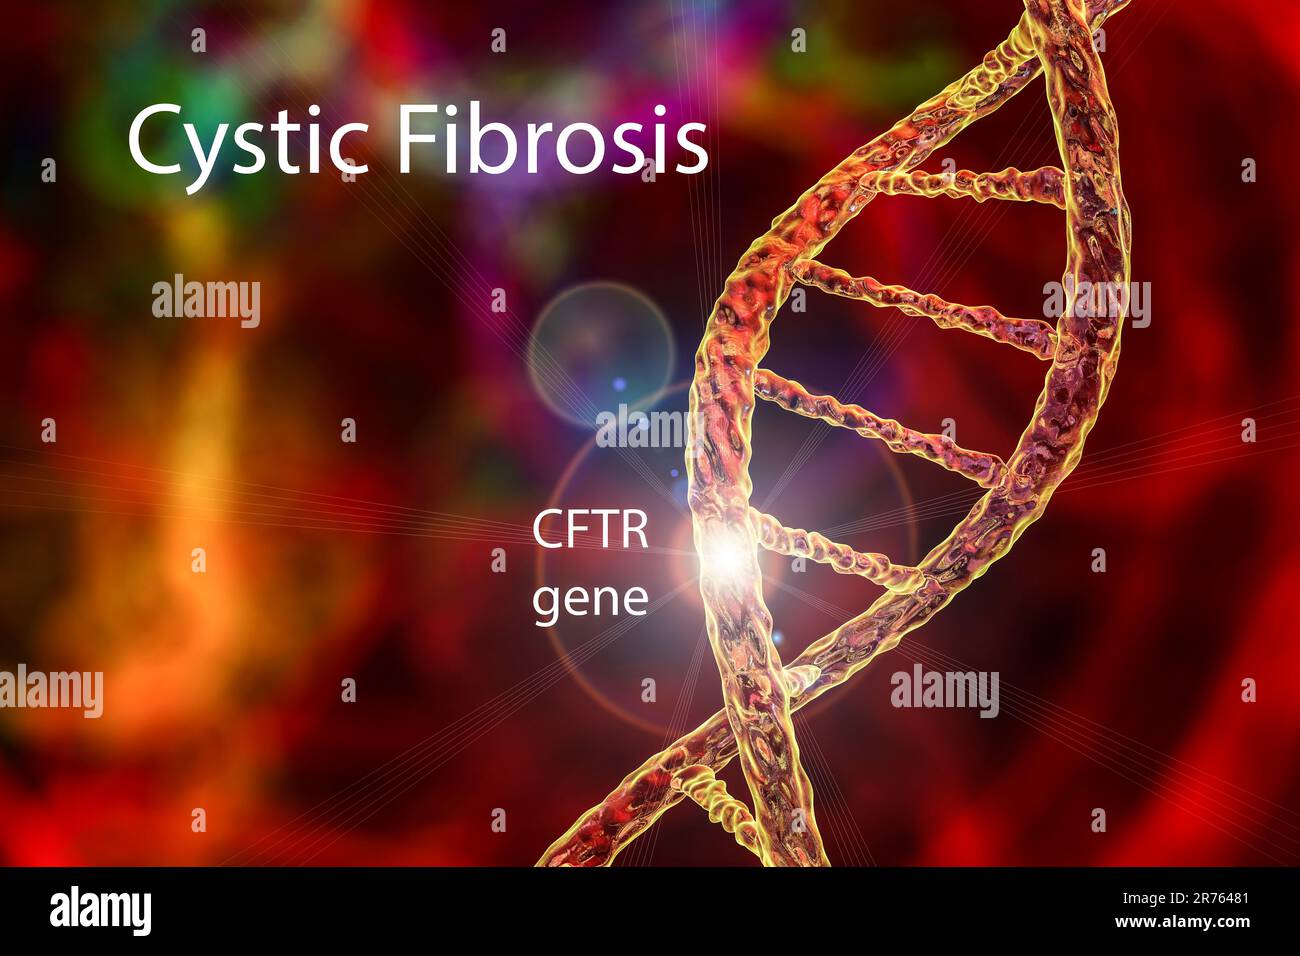 Illustration of cystic fibrosis, a hereditary condition (also called mucoviscidosis) results in the airways (bronchi) being clogged with mucus, causin Stock Photo